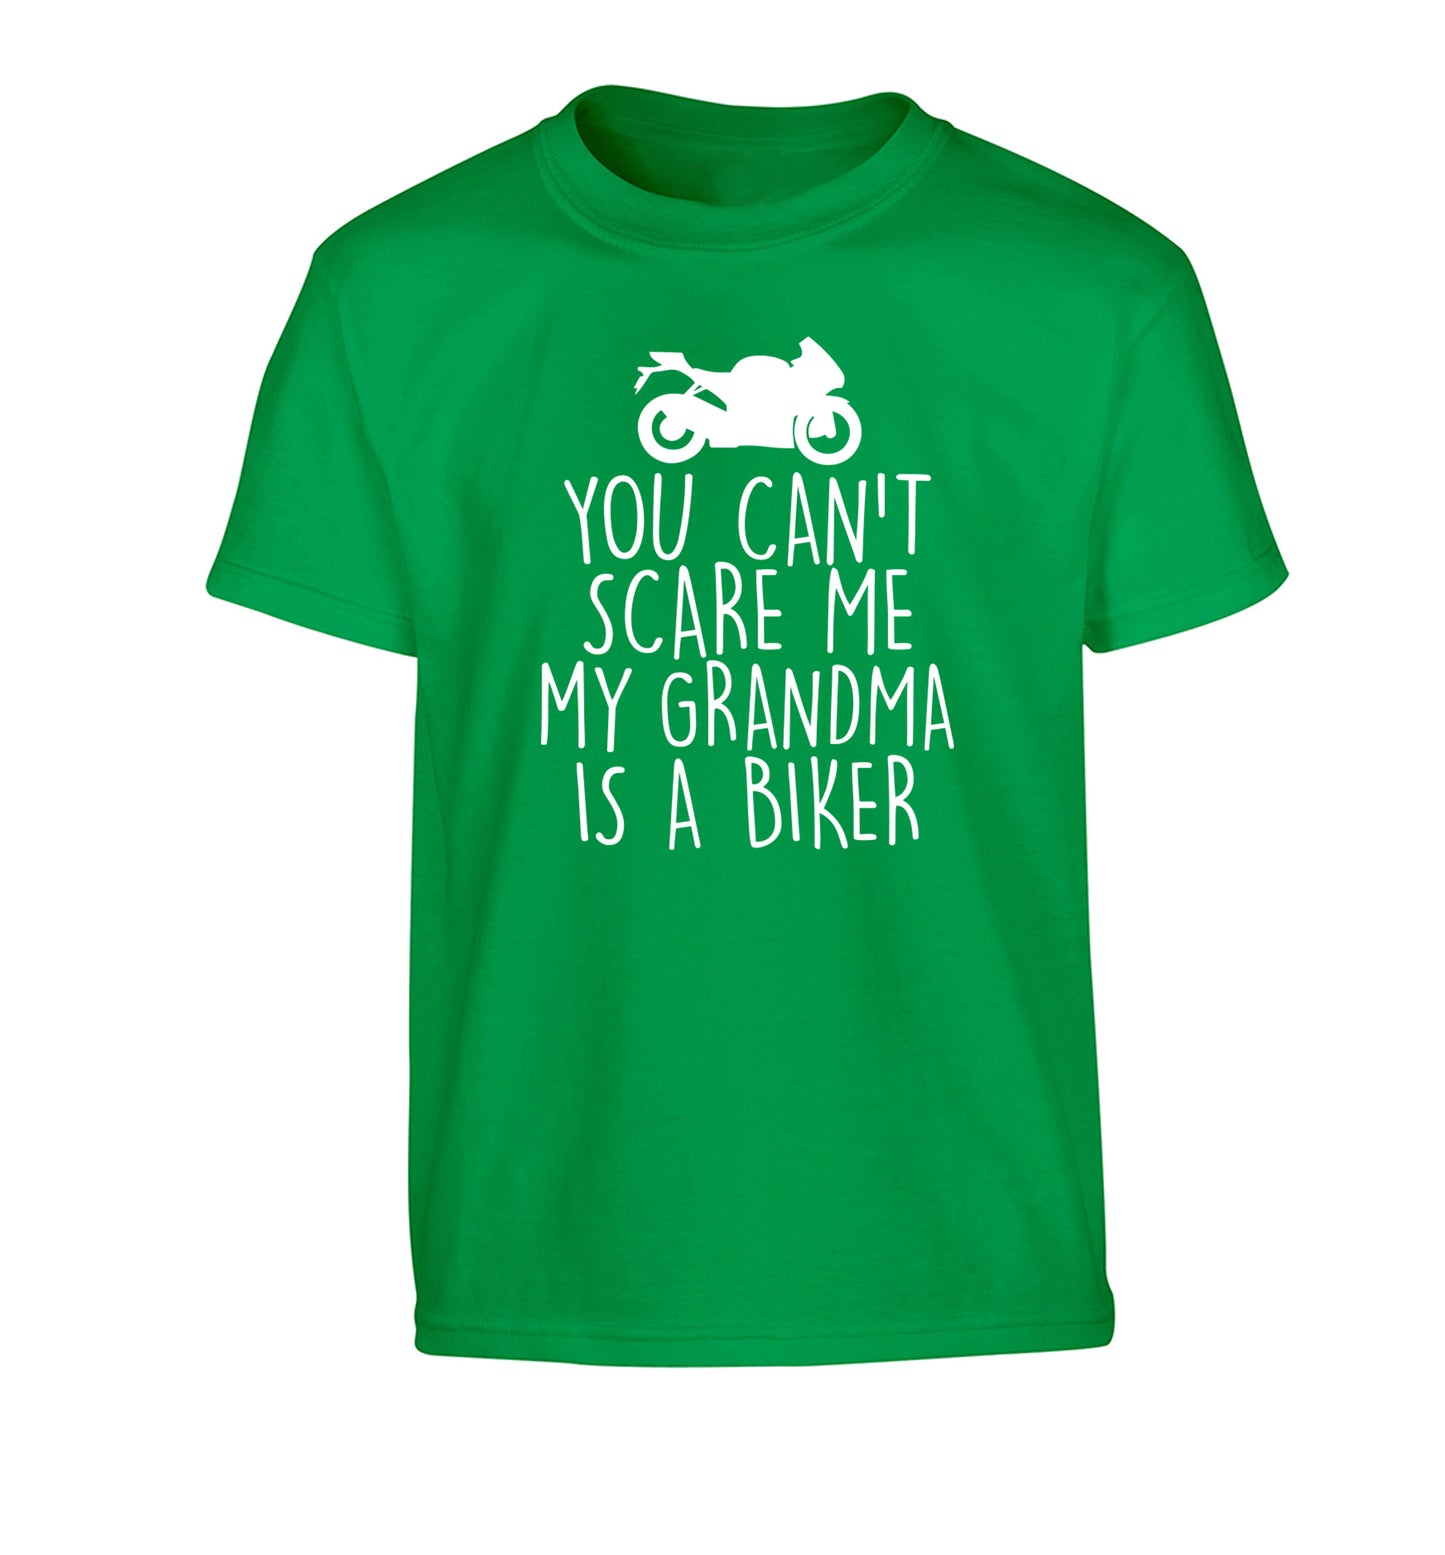 You can't scare me my grandma is a biker Children's green Tshirt 12-13 Years